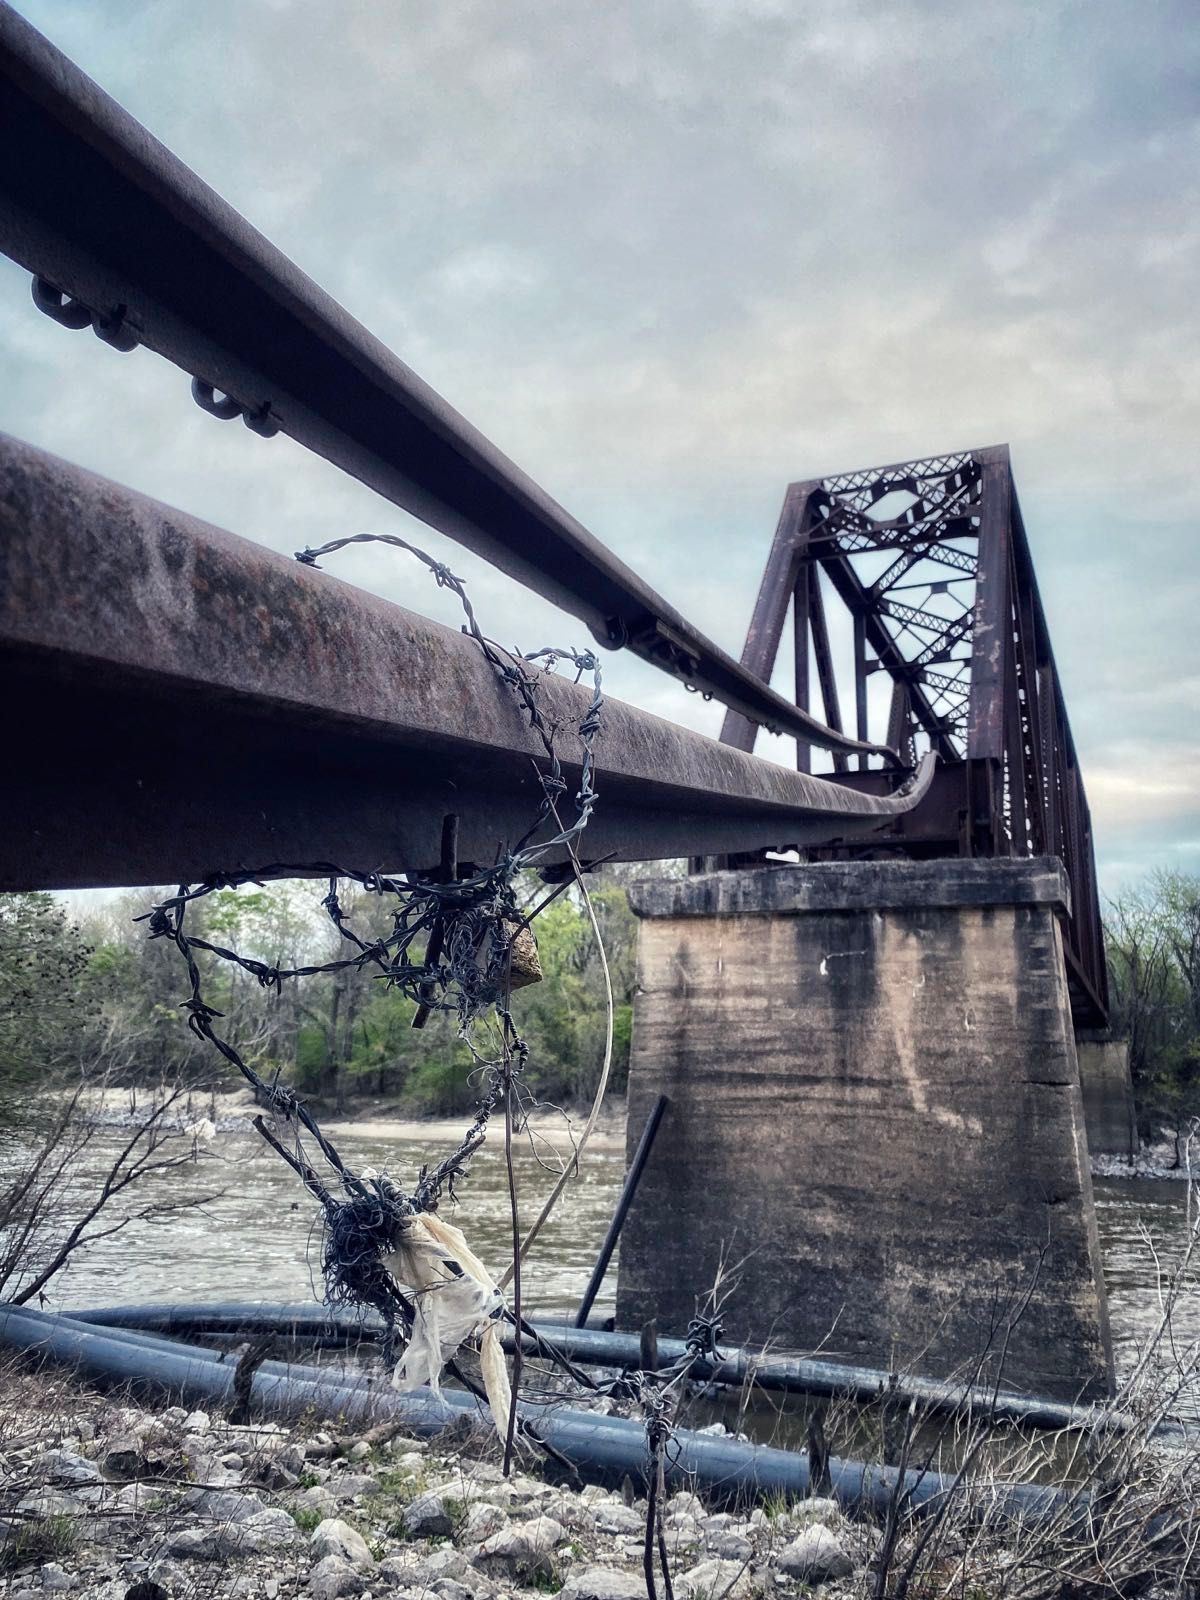 aftermath of an angry pearl river in mississippi — twisted railroad tracks and torn barbed wire.